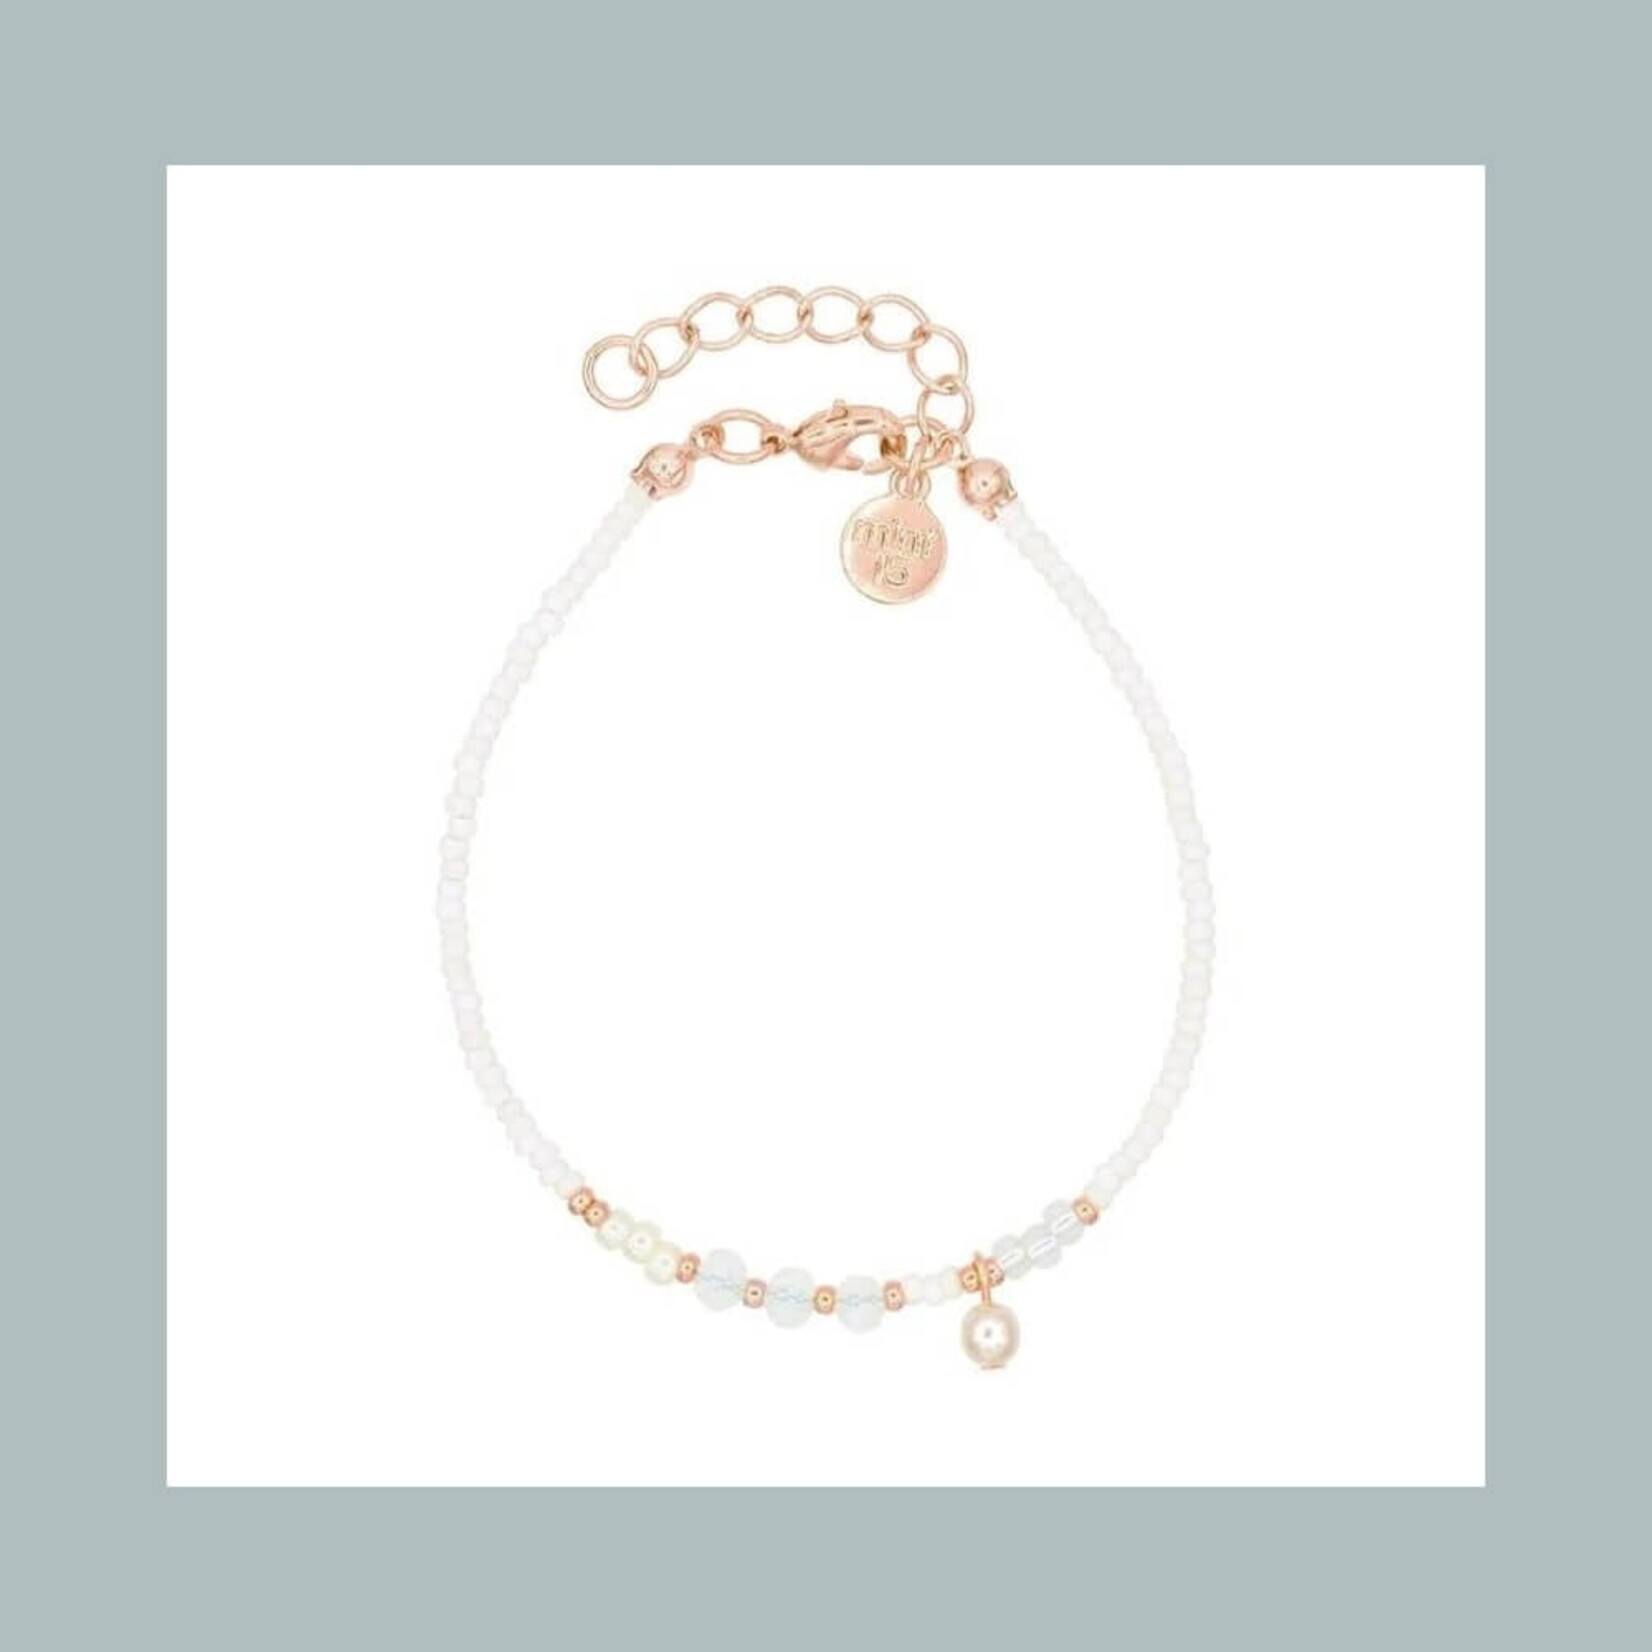 Mint15 mix armband in witte tinten